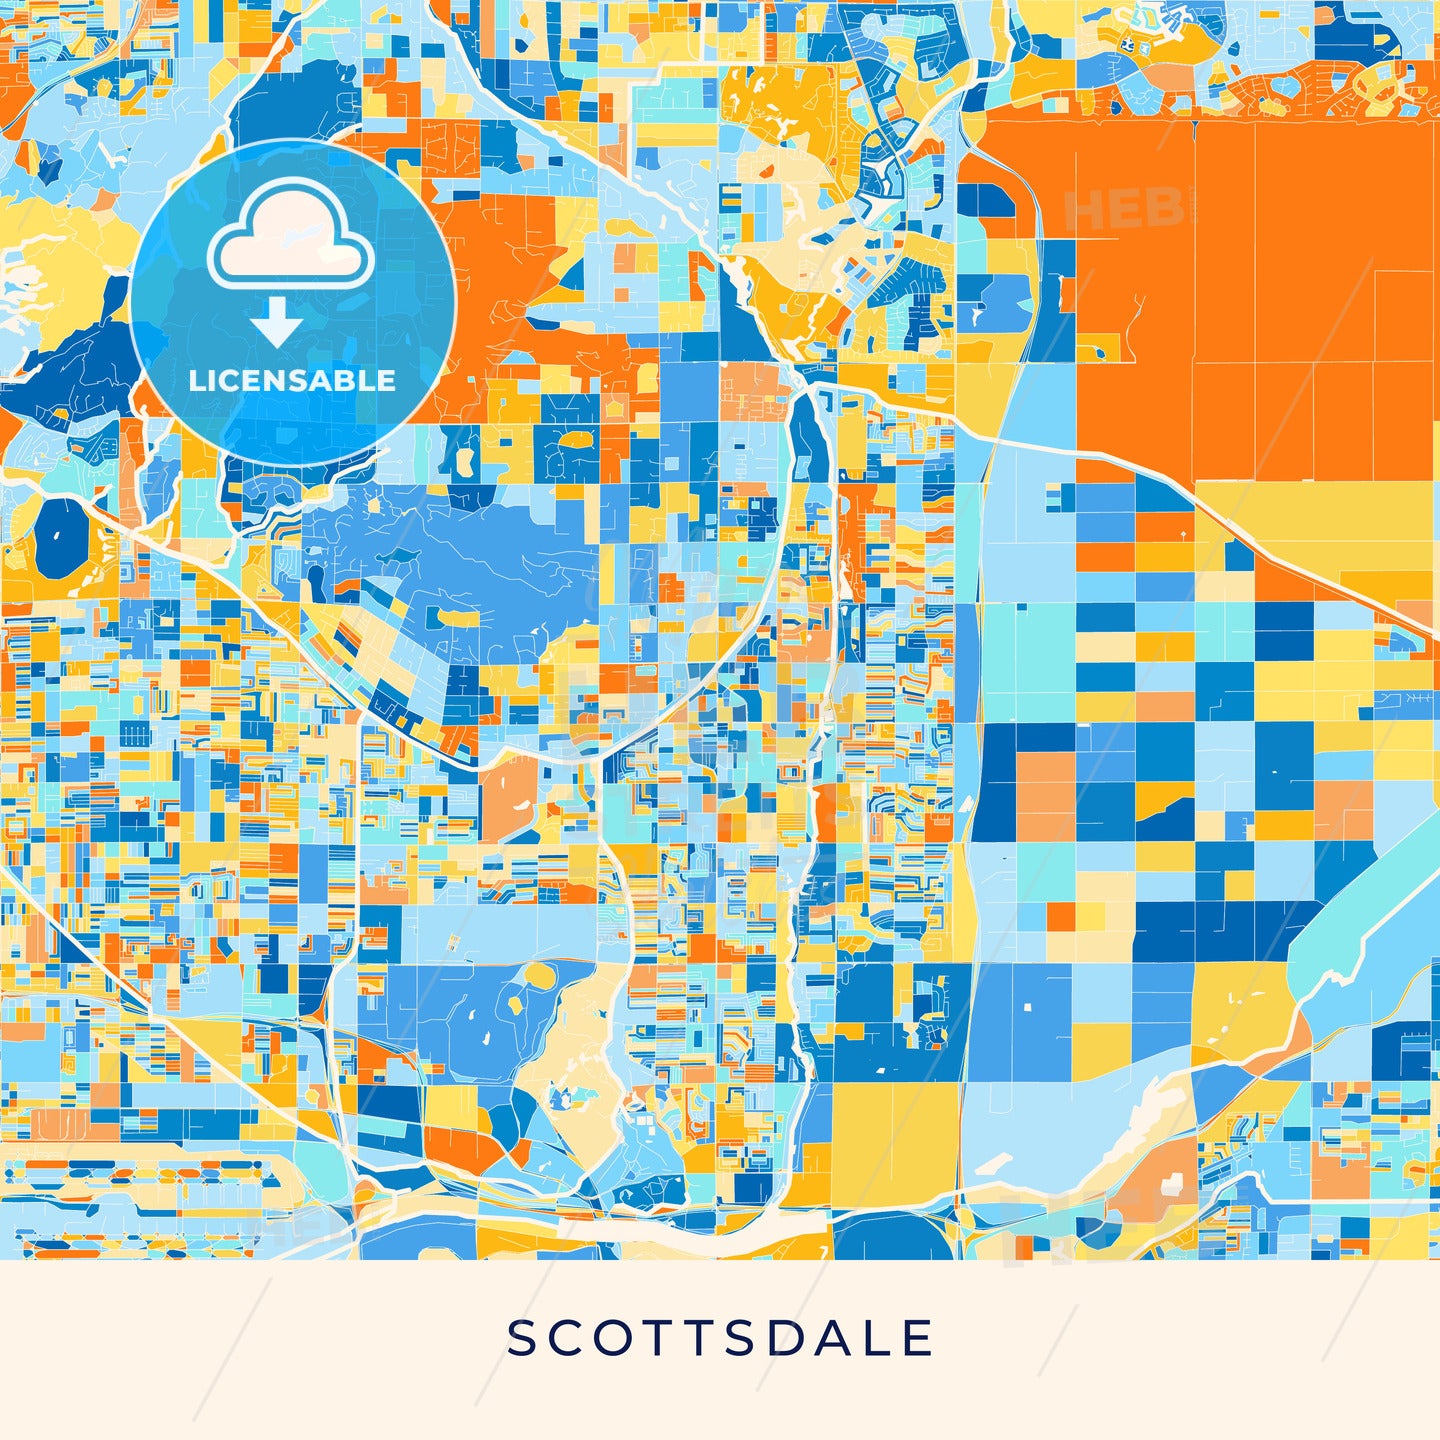 Scottsdale colorful map poster template